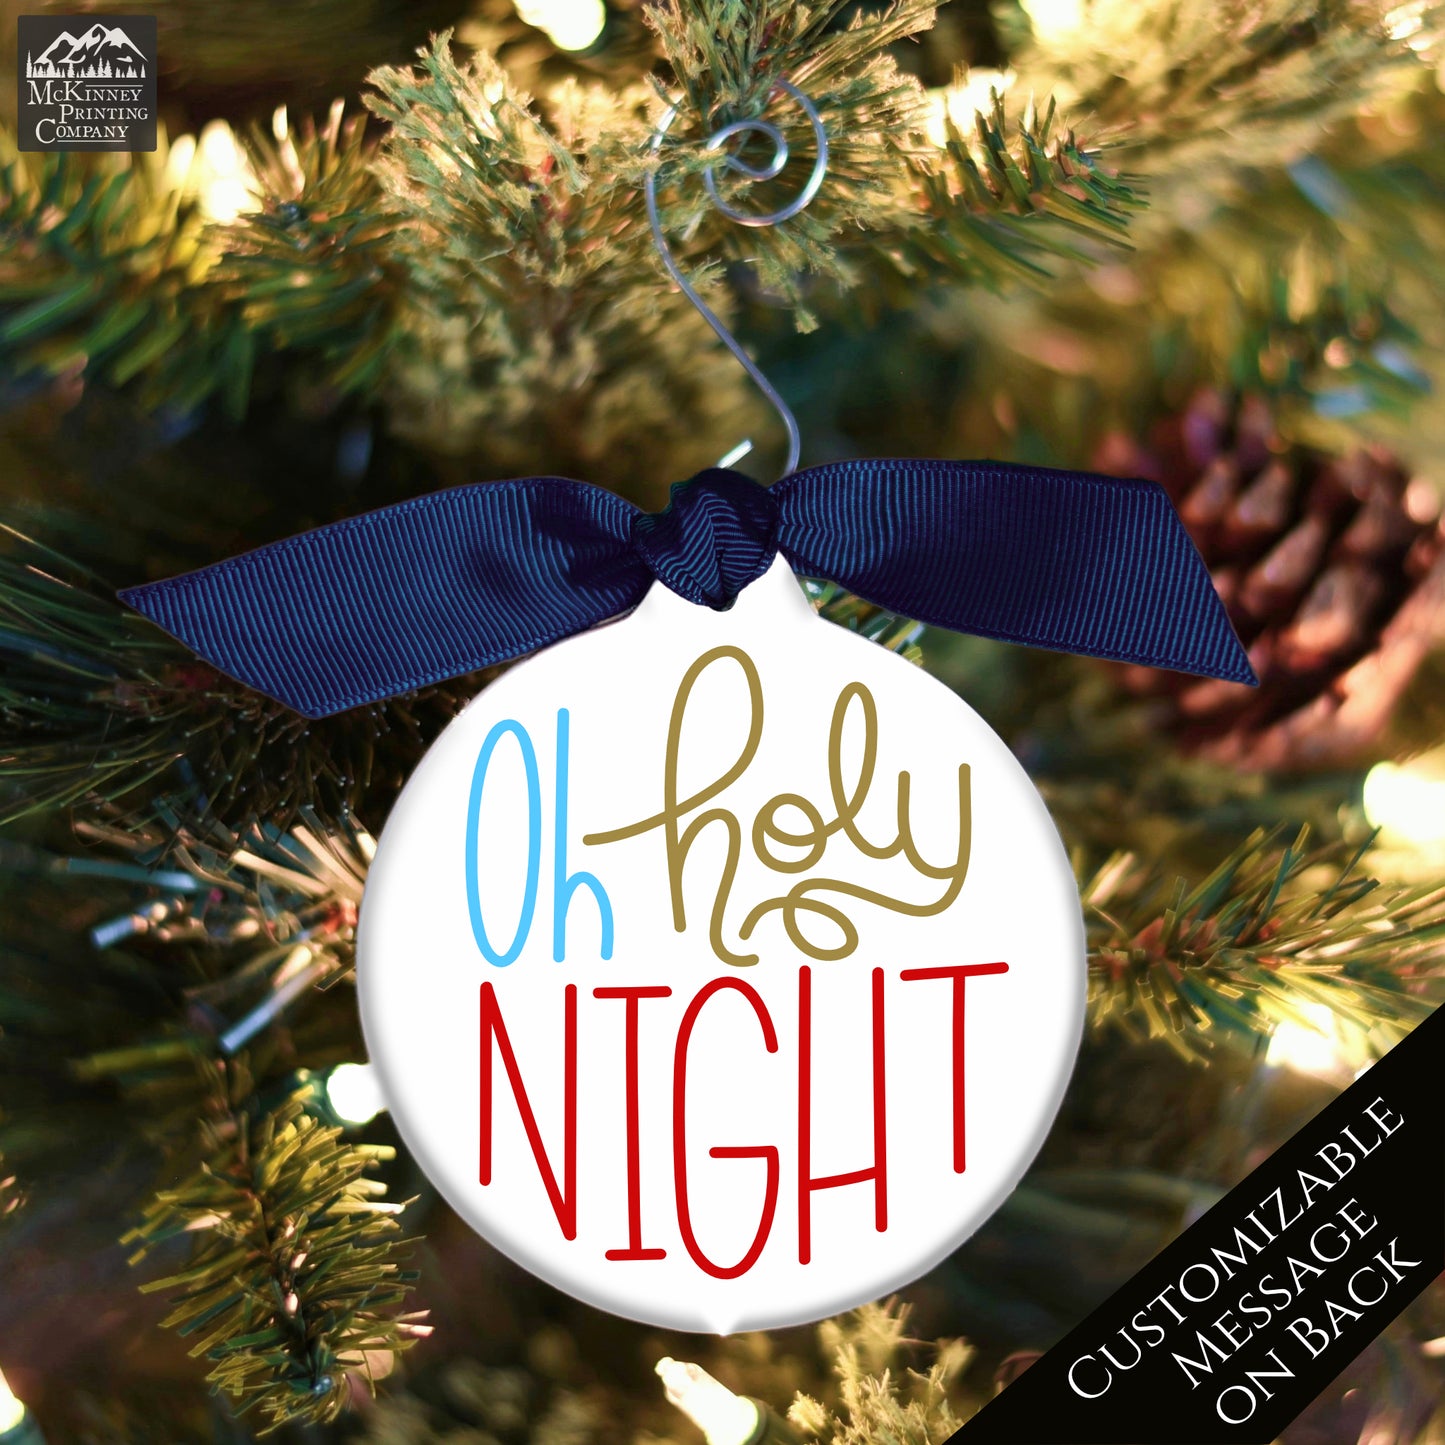 Oh Holy Night - Custom Ornament, Personalized, Christmas Gift, Personalized